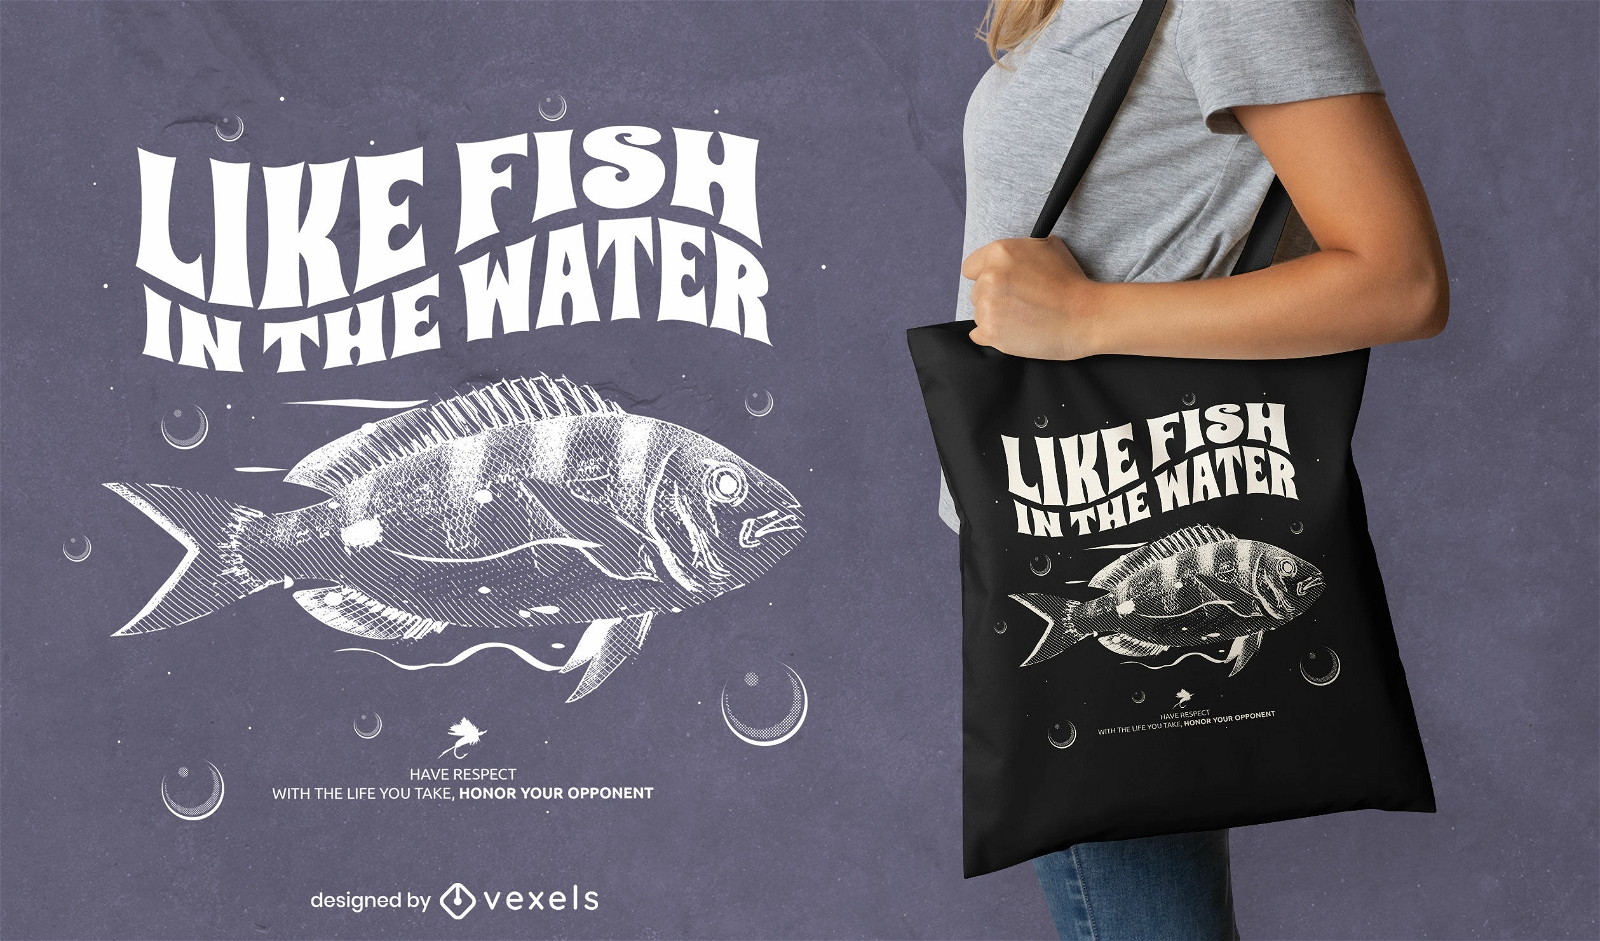 Fish in the water quote tote bag design